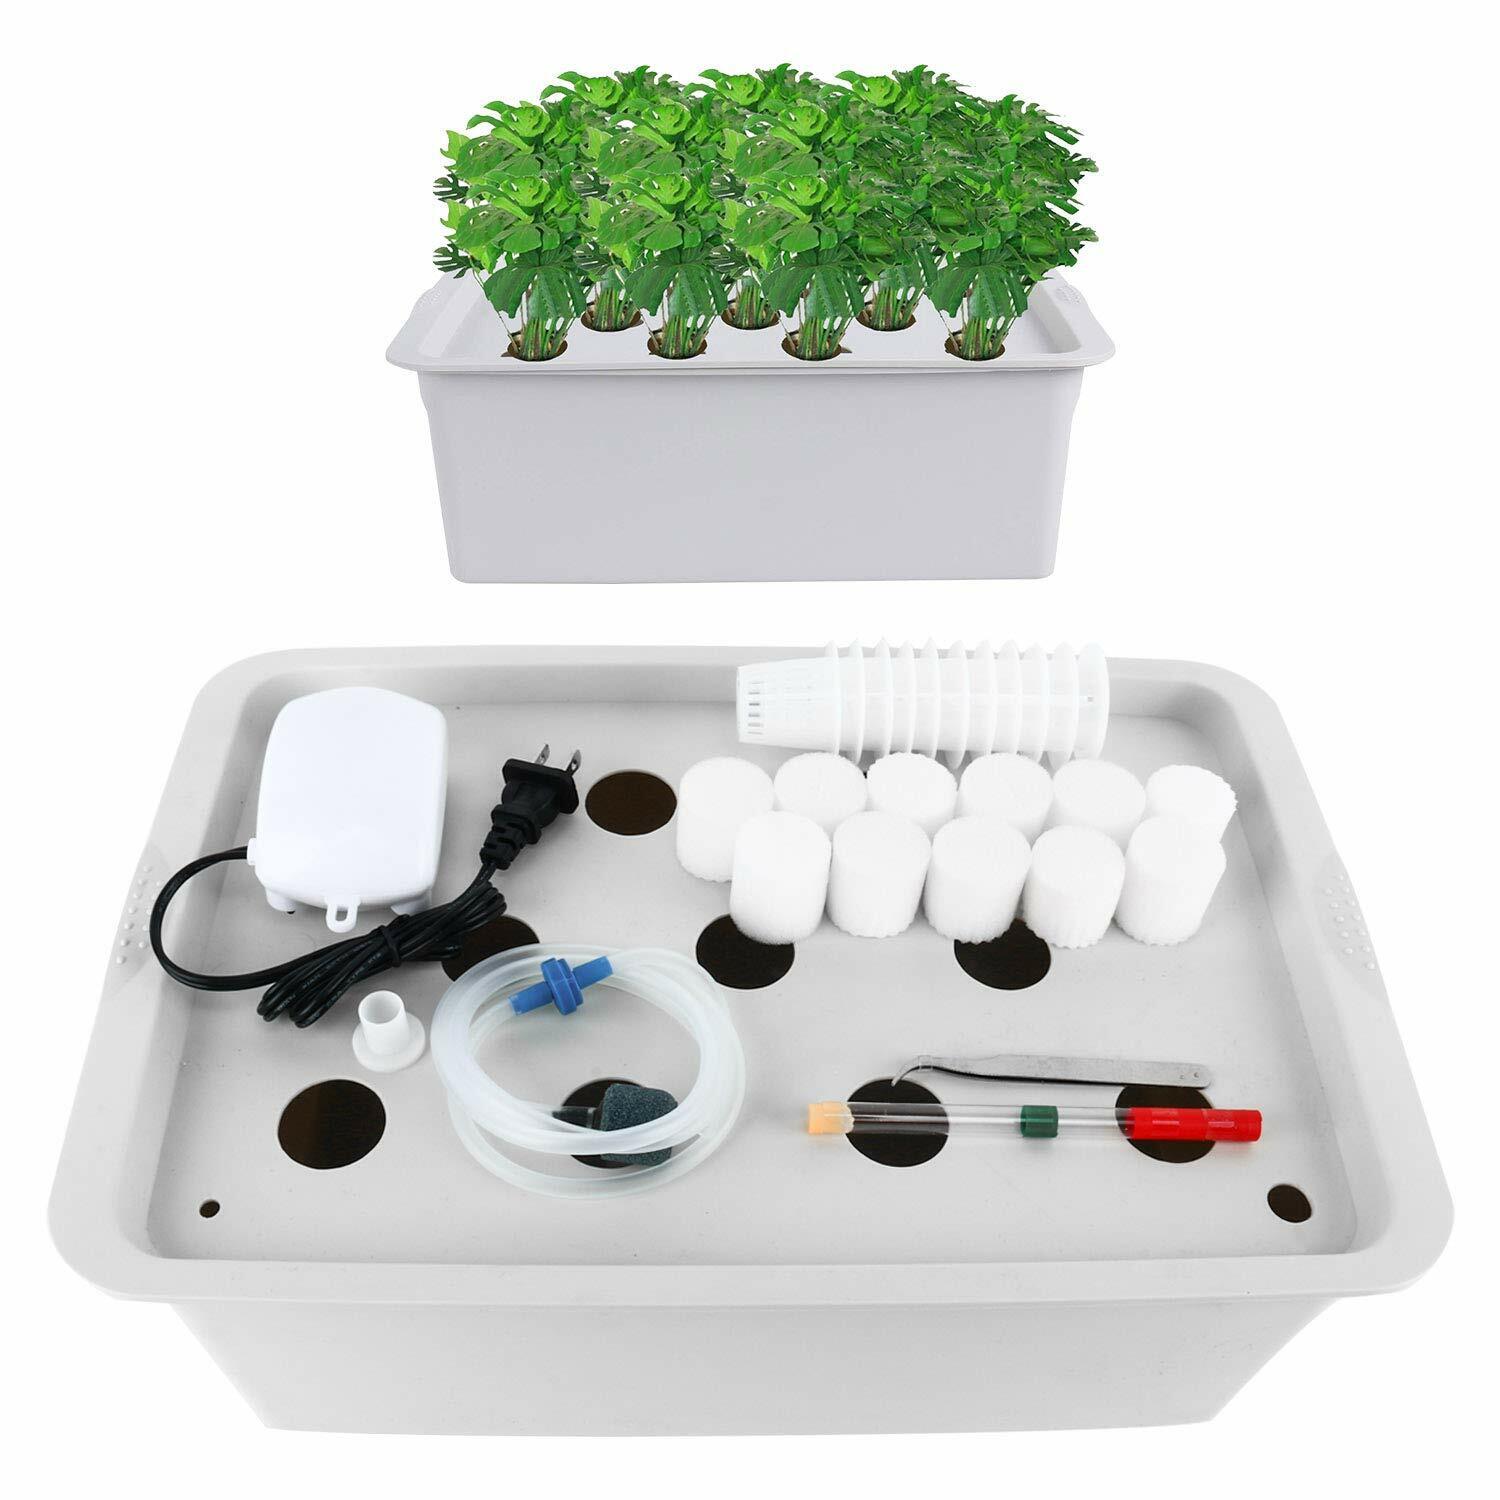 11 Holes Plant Site Hydroponic System Grow Kit Indoor Cabinet Box w/ Instruction